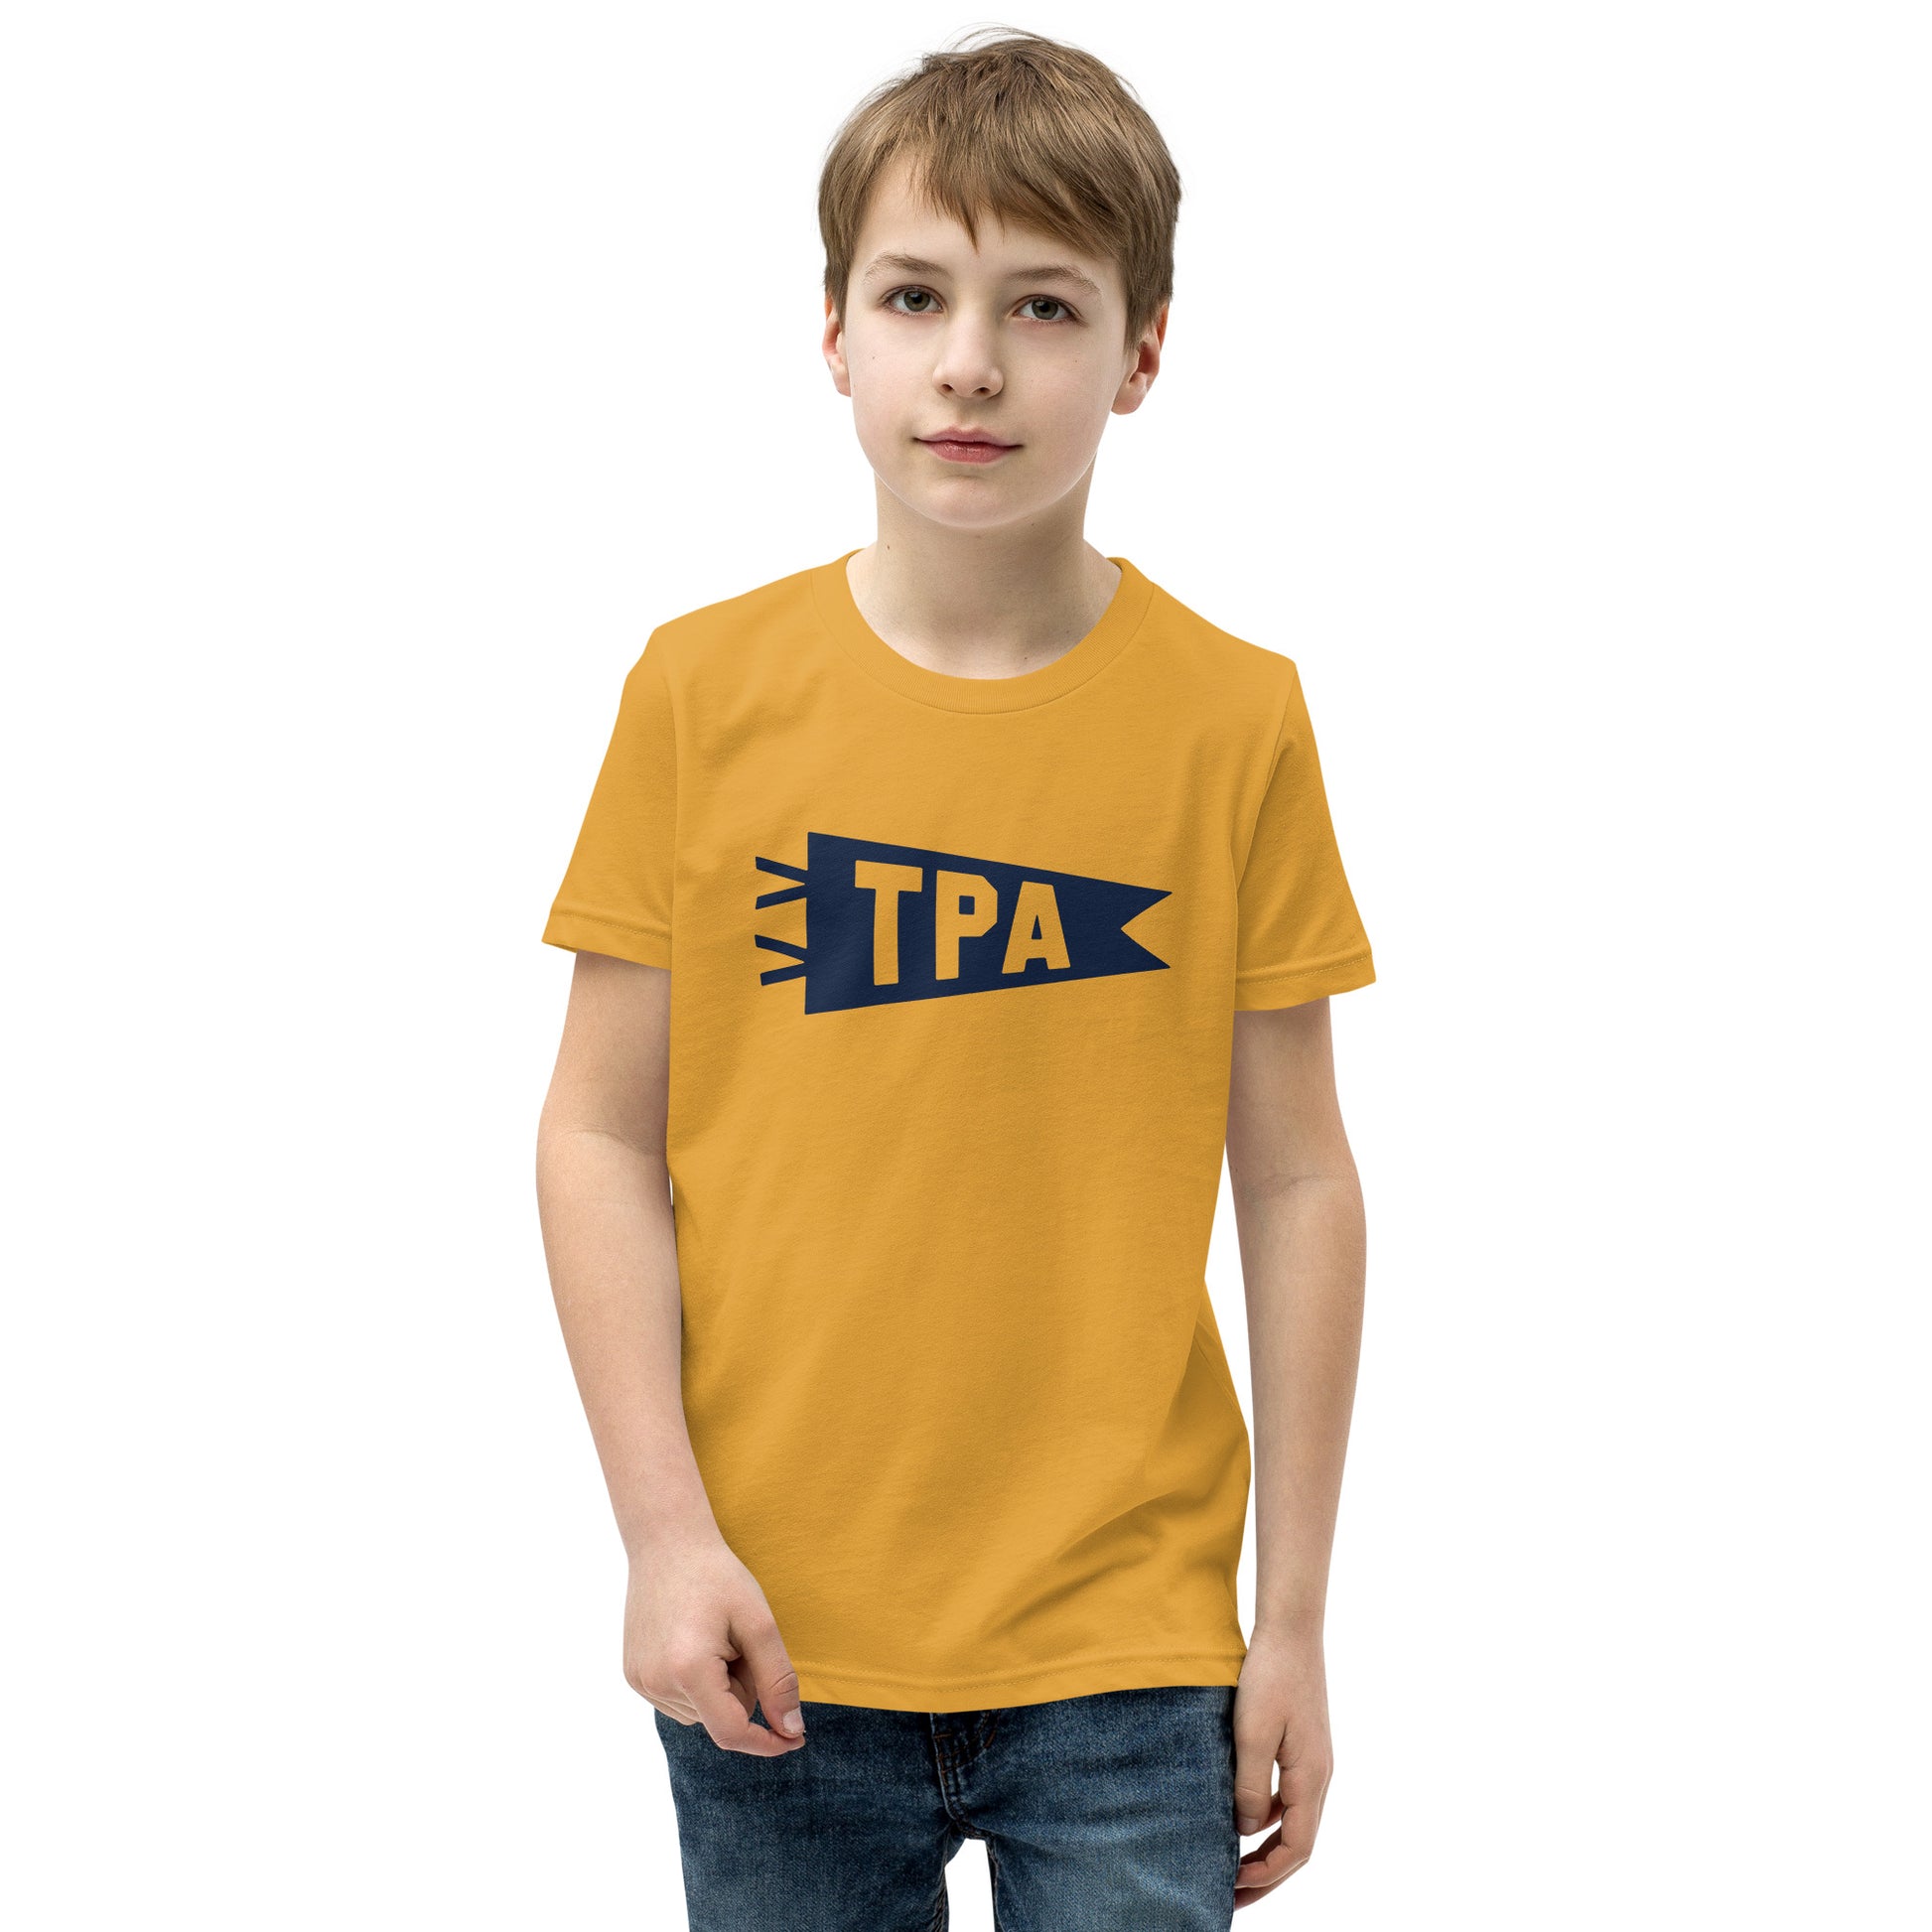 Kid's Airport Code Tee - Navy Blue Graphic • TPA Tampa • YHM Designs - Image 08